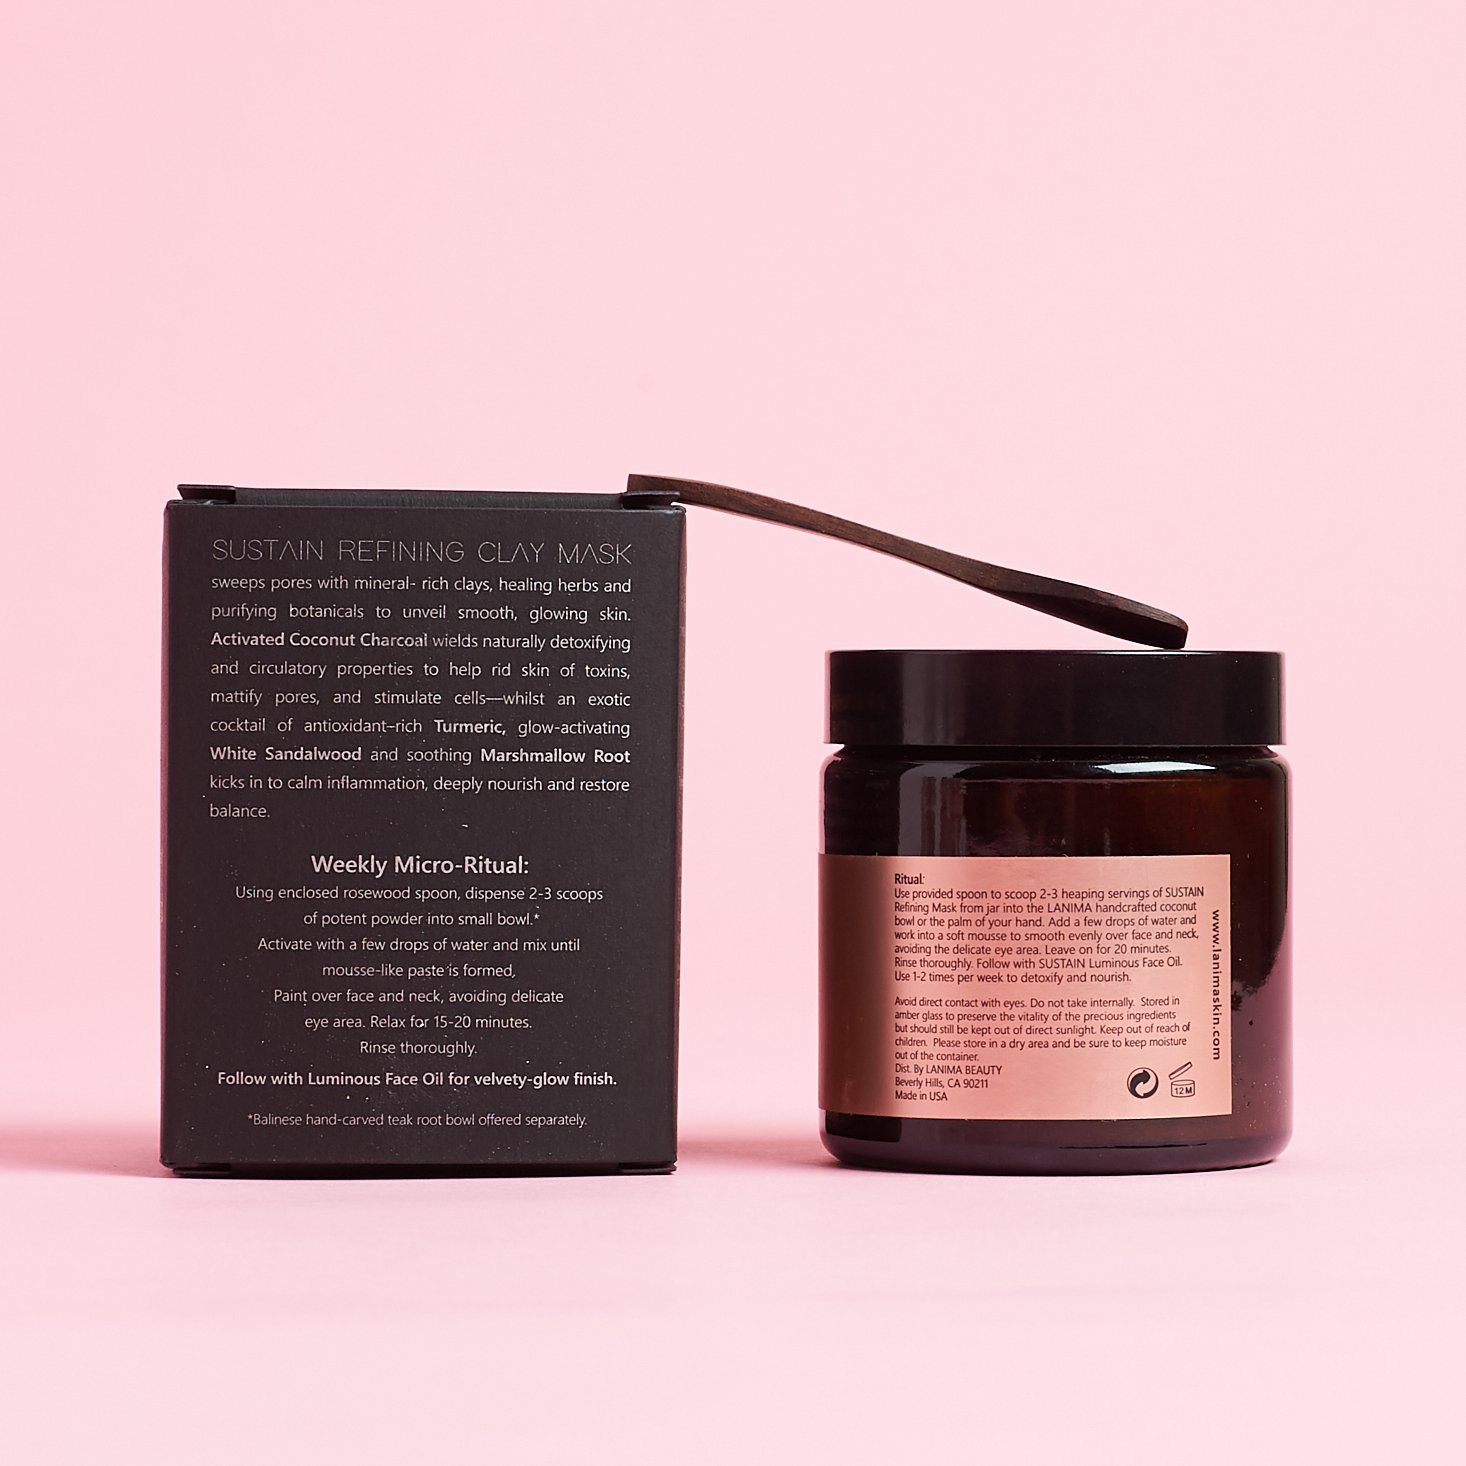 back of Lanima Skin Sustain Refining Clay Mask with box and spoon on top